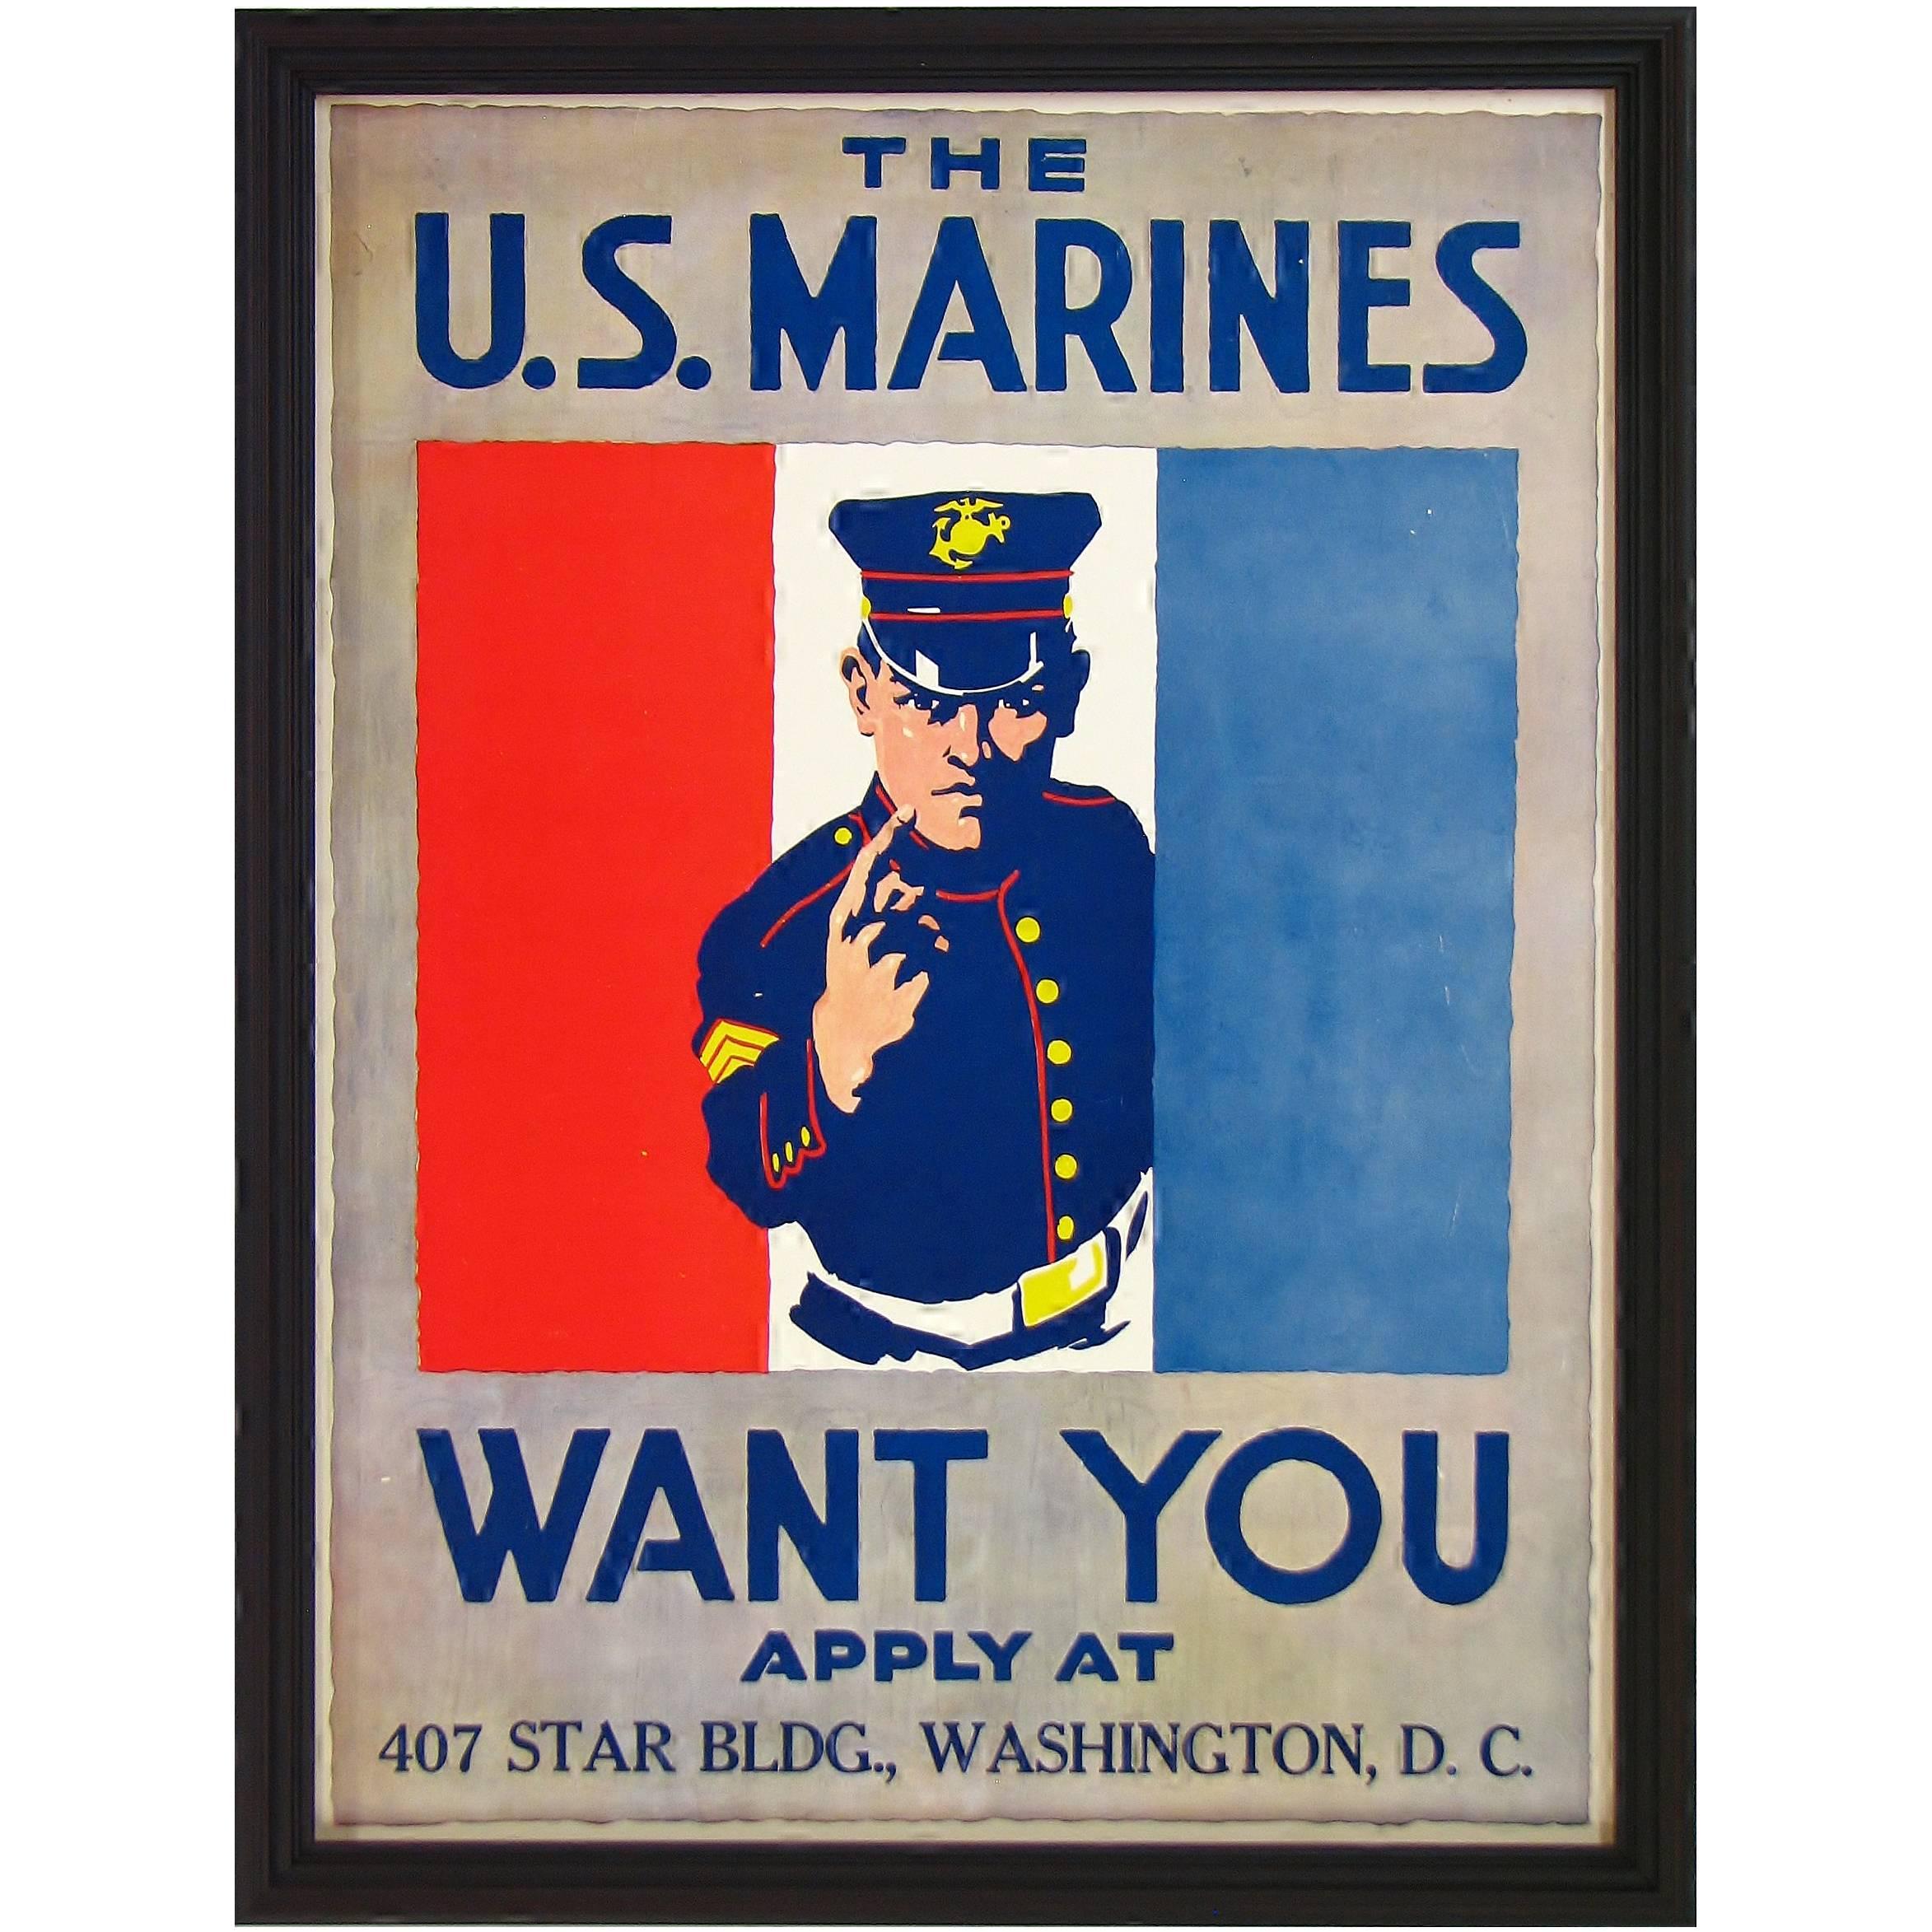 "The U.S. Marines Want You Vintage" WWI DC Recruitment Poster, circa 1918